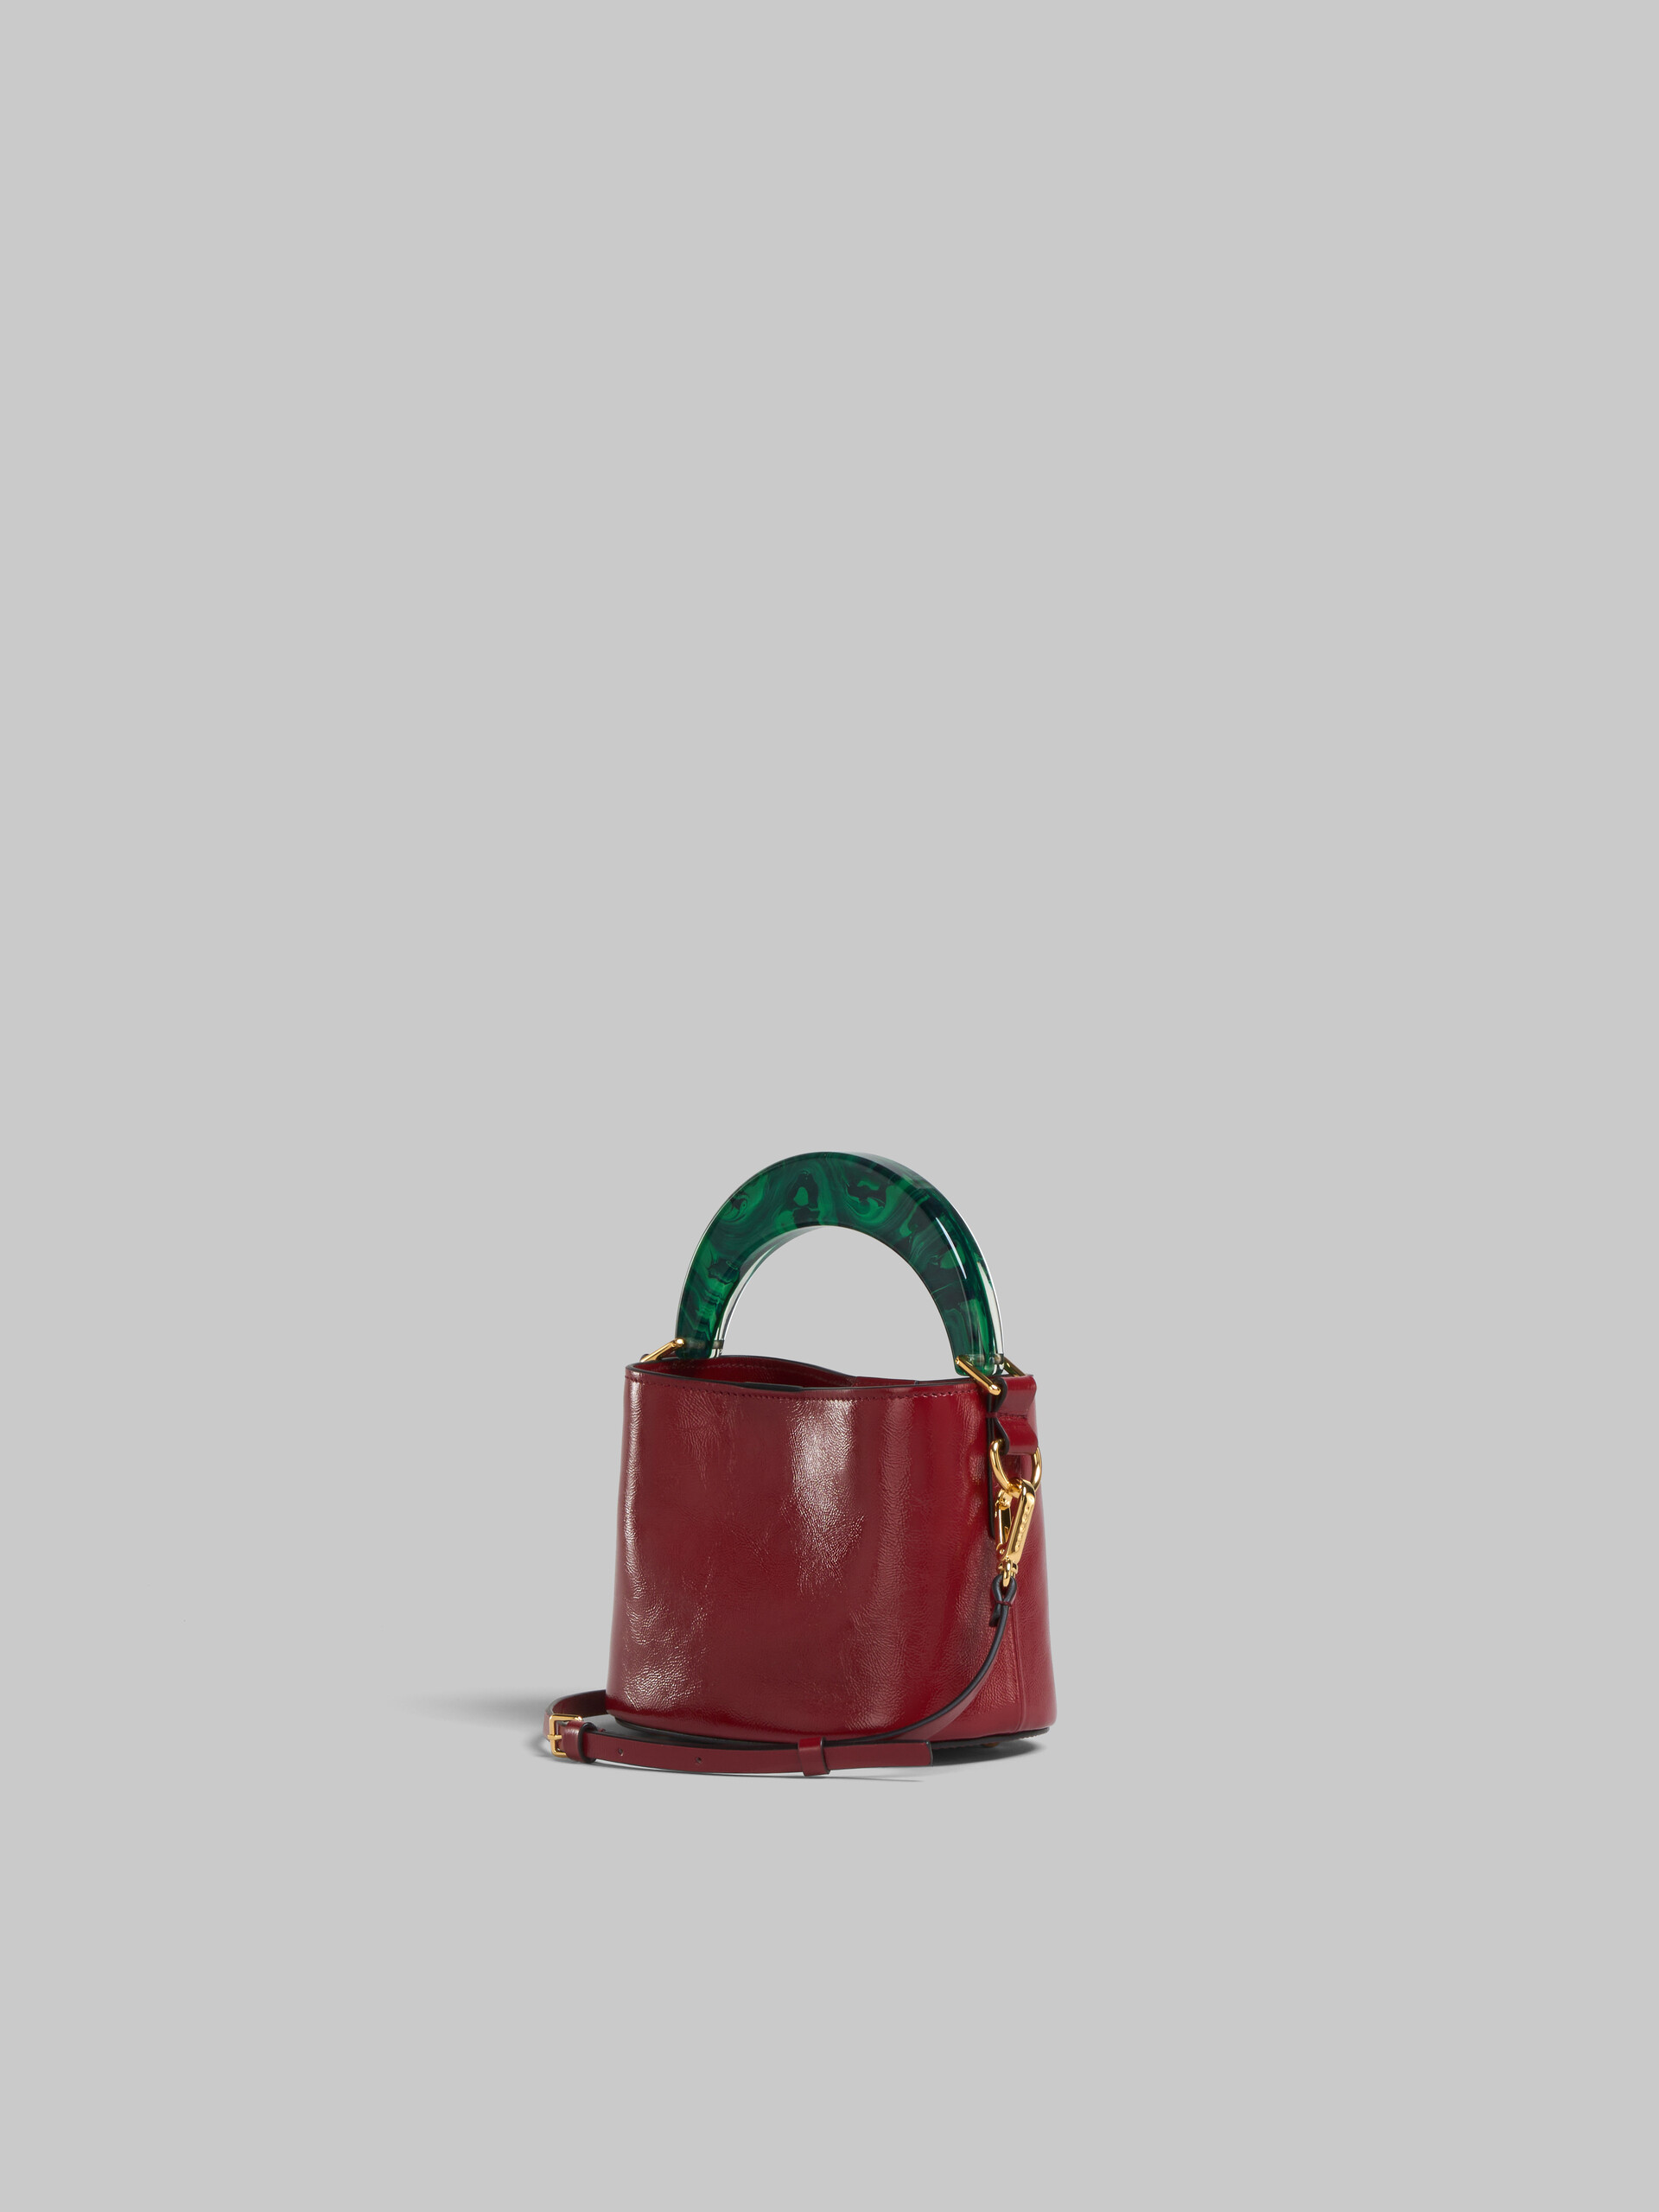 Venice Mini Bucket Bag in ruby red patent leather - Shoulder Bag - Image 2